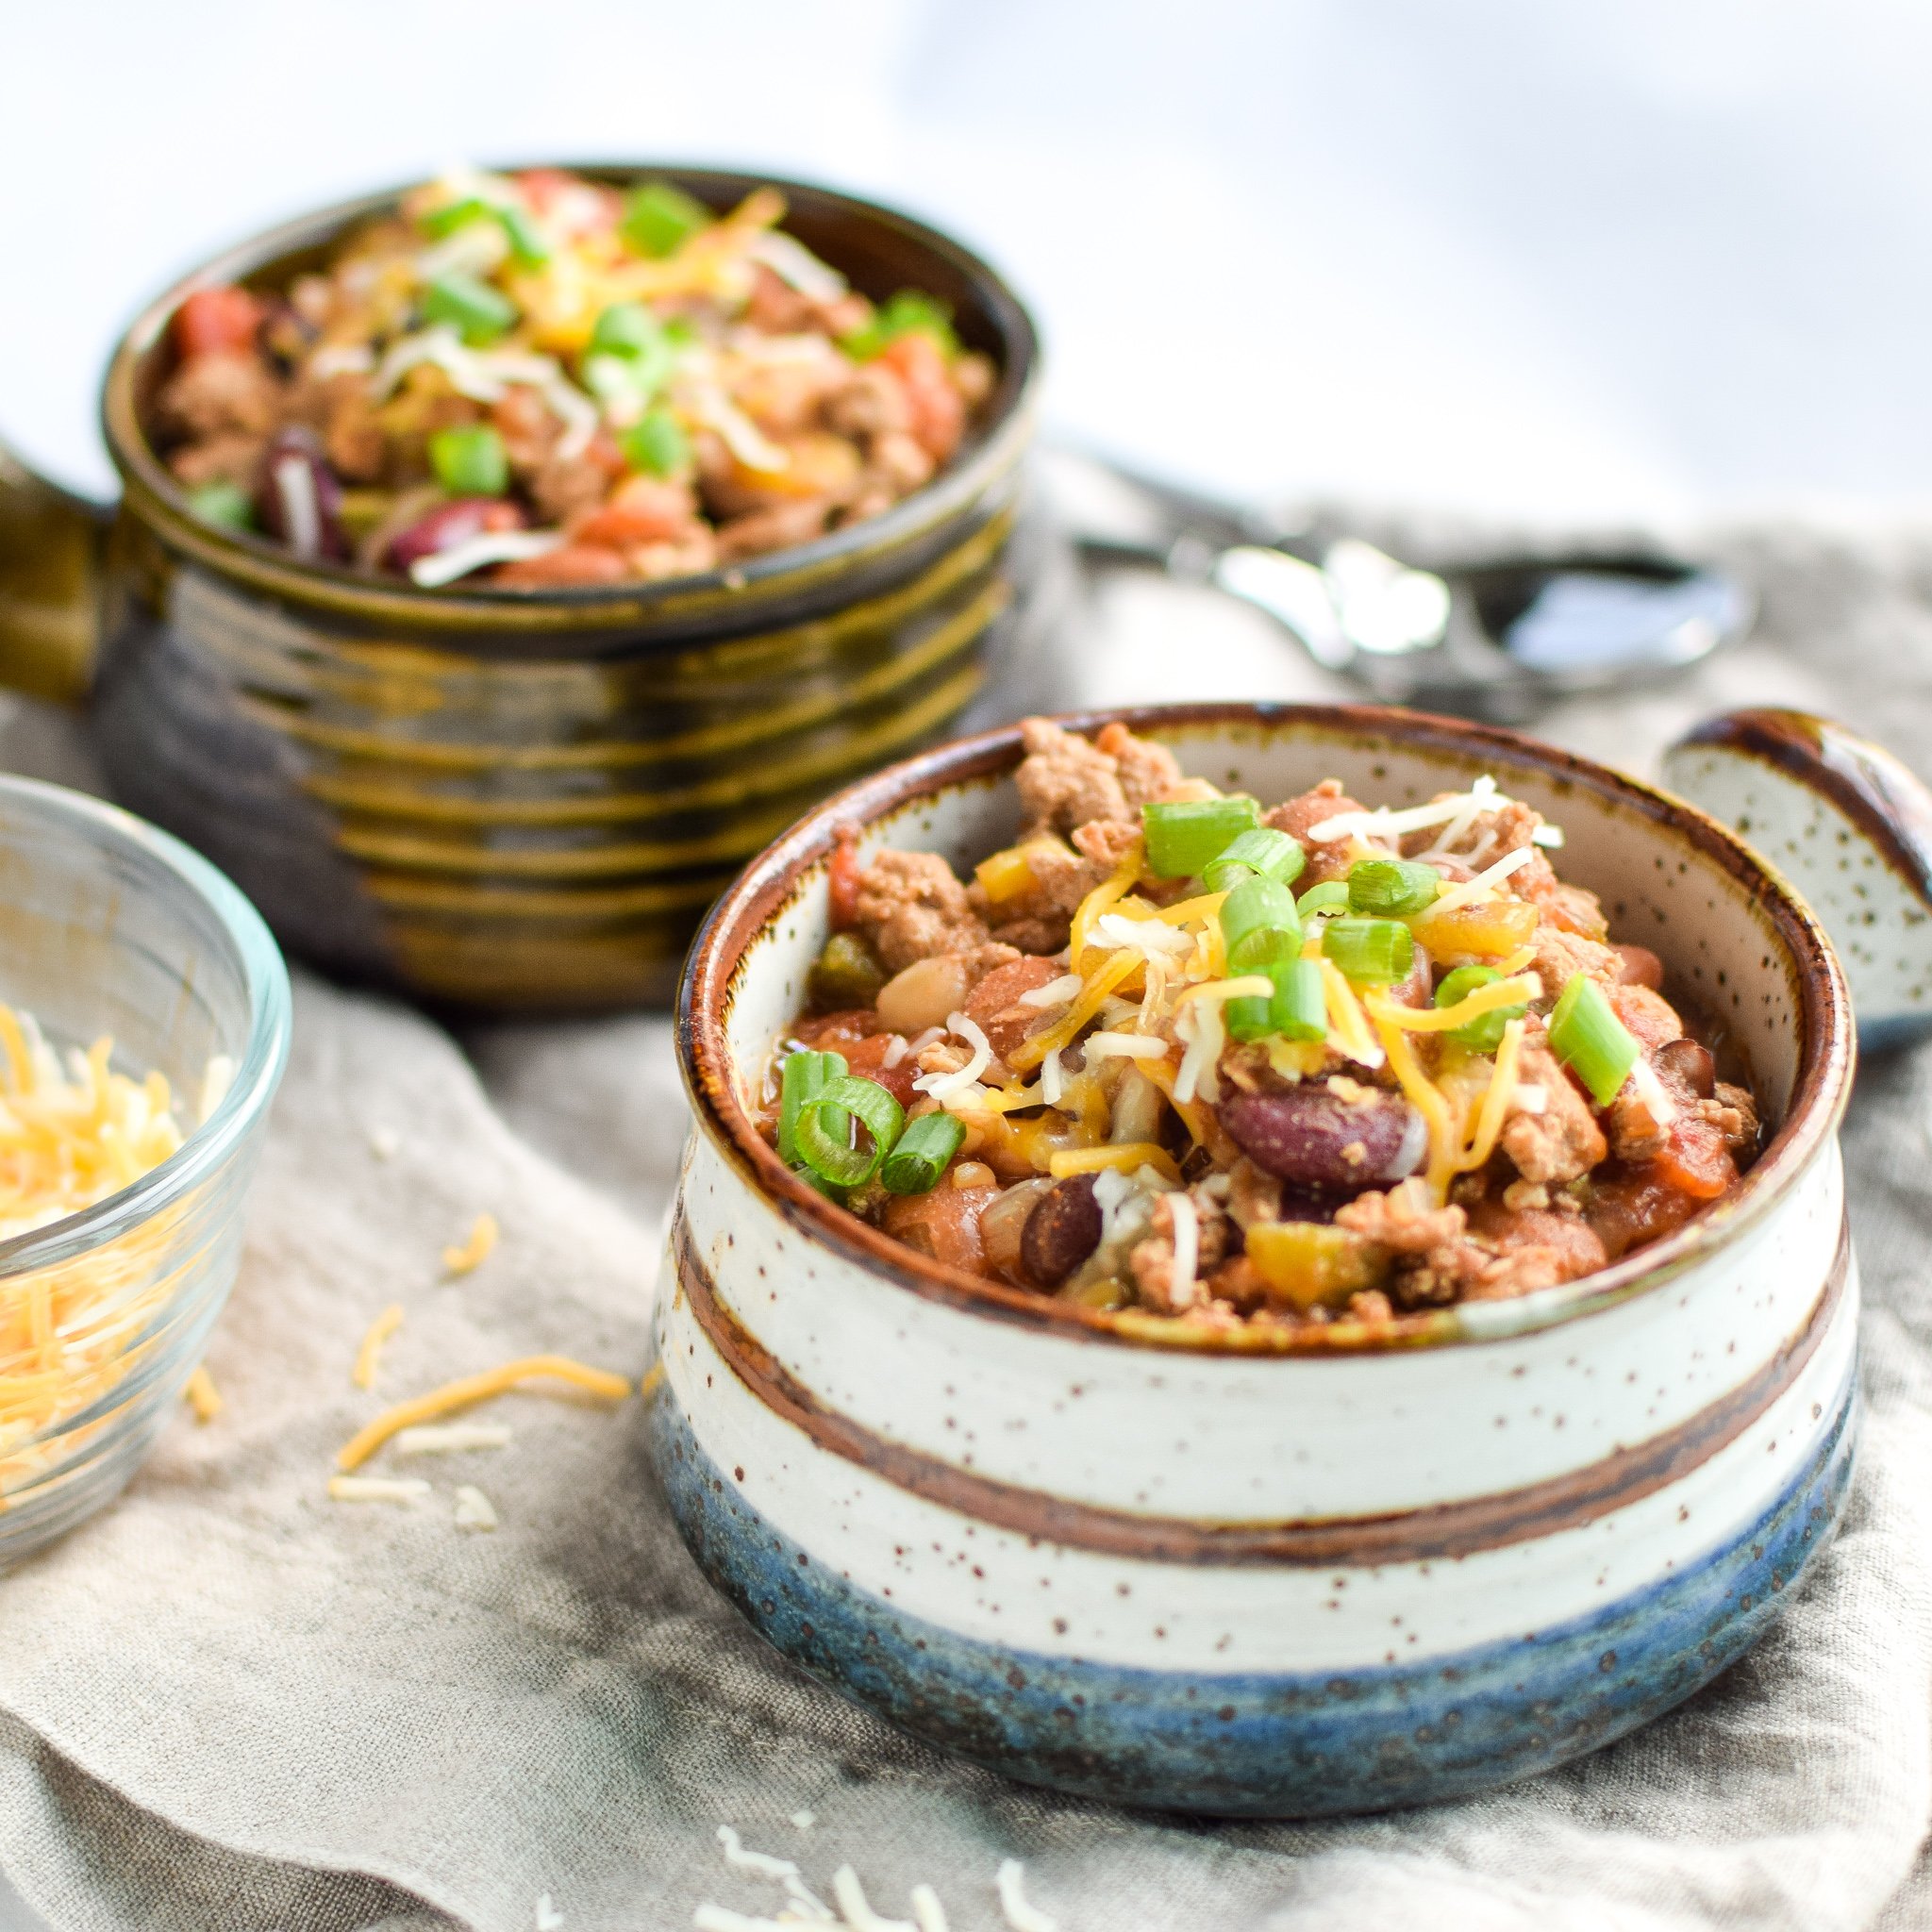 Easy Slow Cooker 4-Bean Turkey Chili recipe - A slow cooker classic that should be in everyone's cookbook! A hearty bean and turkey chili with some smokey kick! - ProjectMealPlan.com